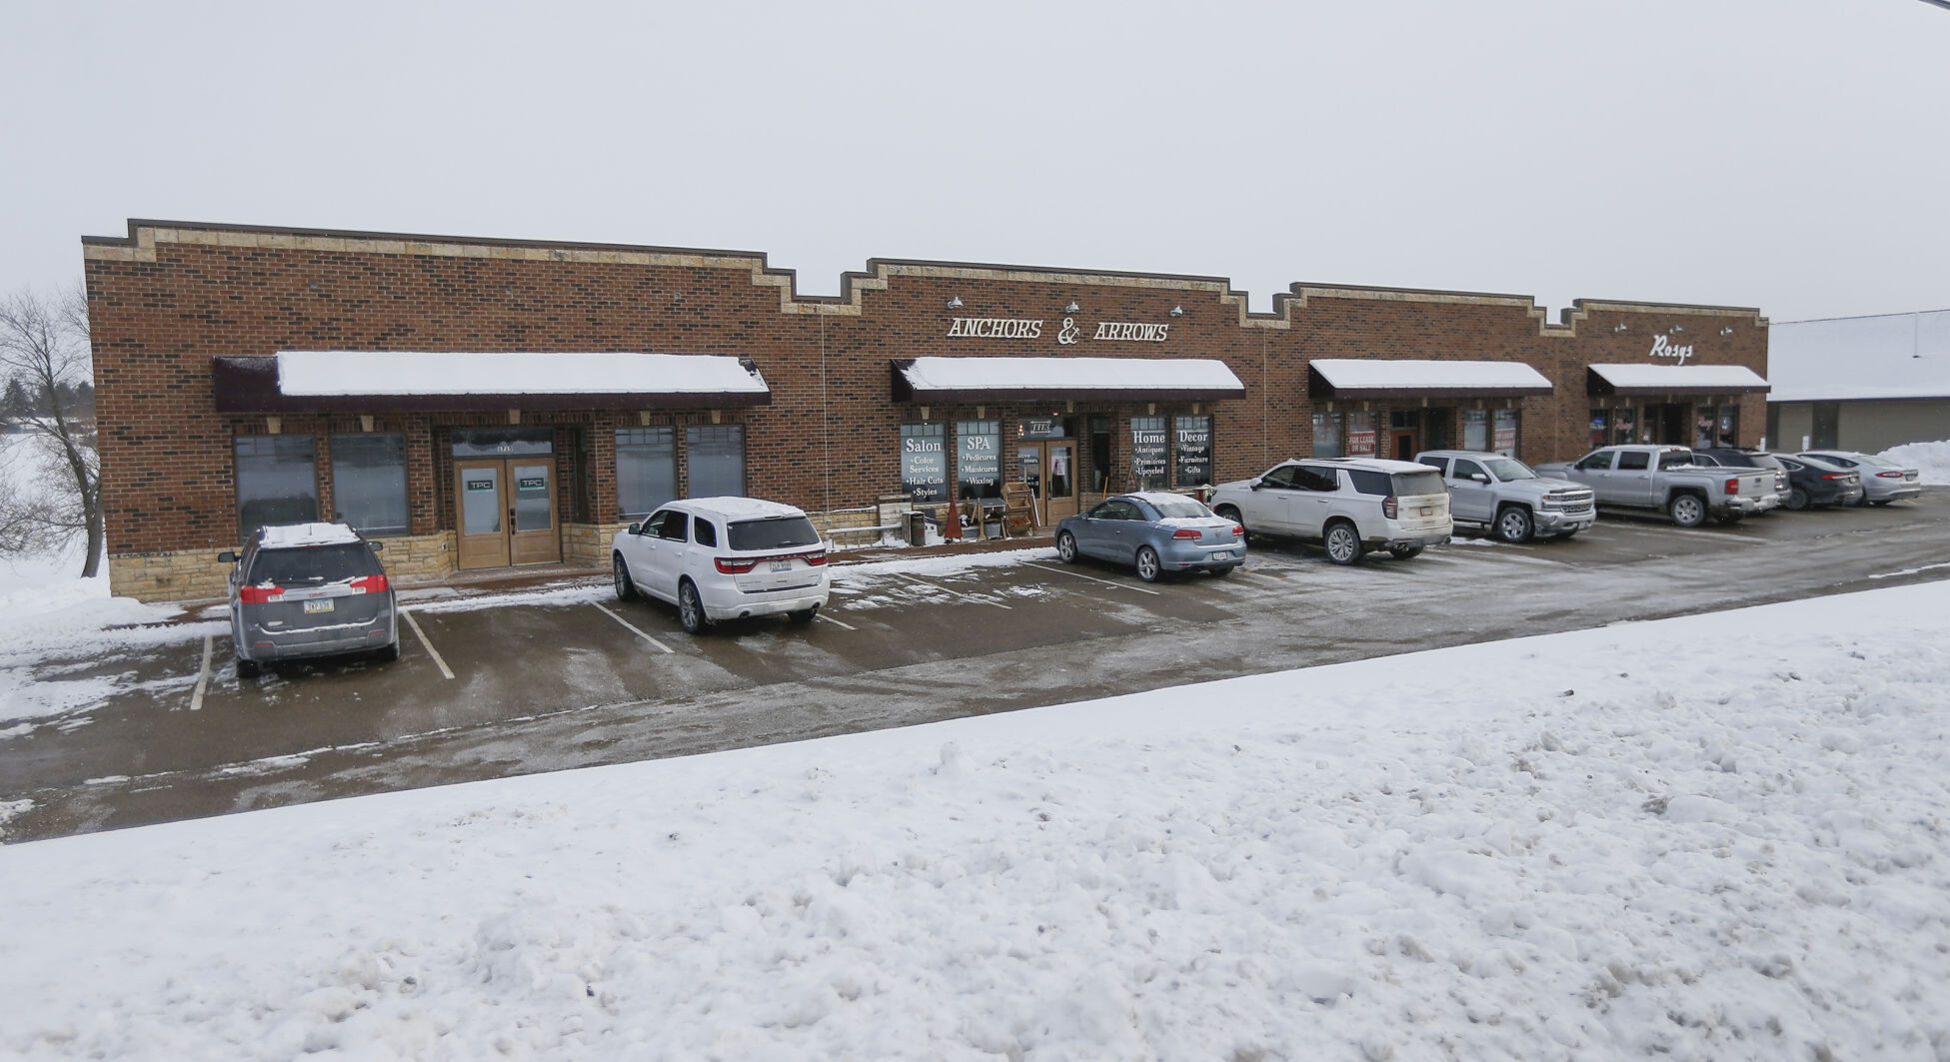 The planned location for a new cannabis dispensary in East Dubuque, Ill. Dan Dolan, owner of The Dispensary Fulton (Ill.) has announced to East Dubuque City Council his intentions to open an adult-use cannabis dispensary at the location in April. PHOTO CREDIT: Dave Kettering